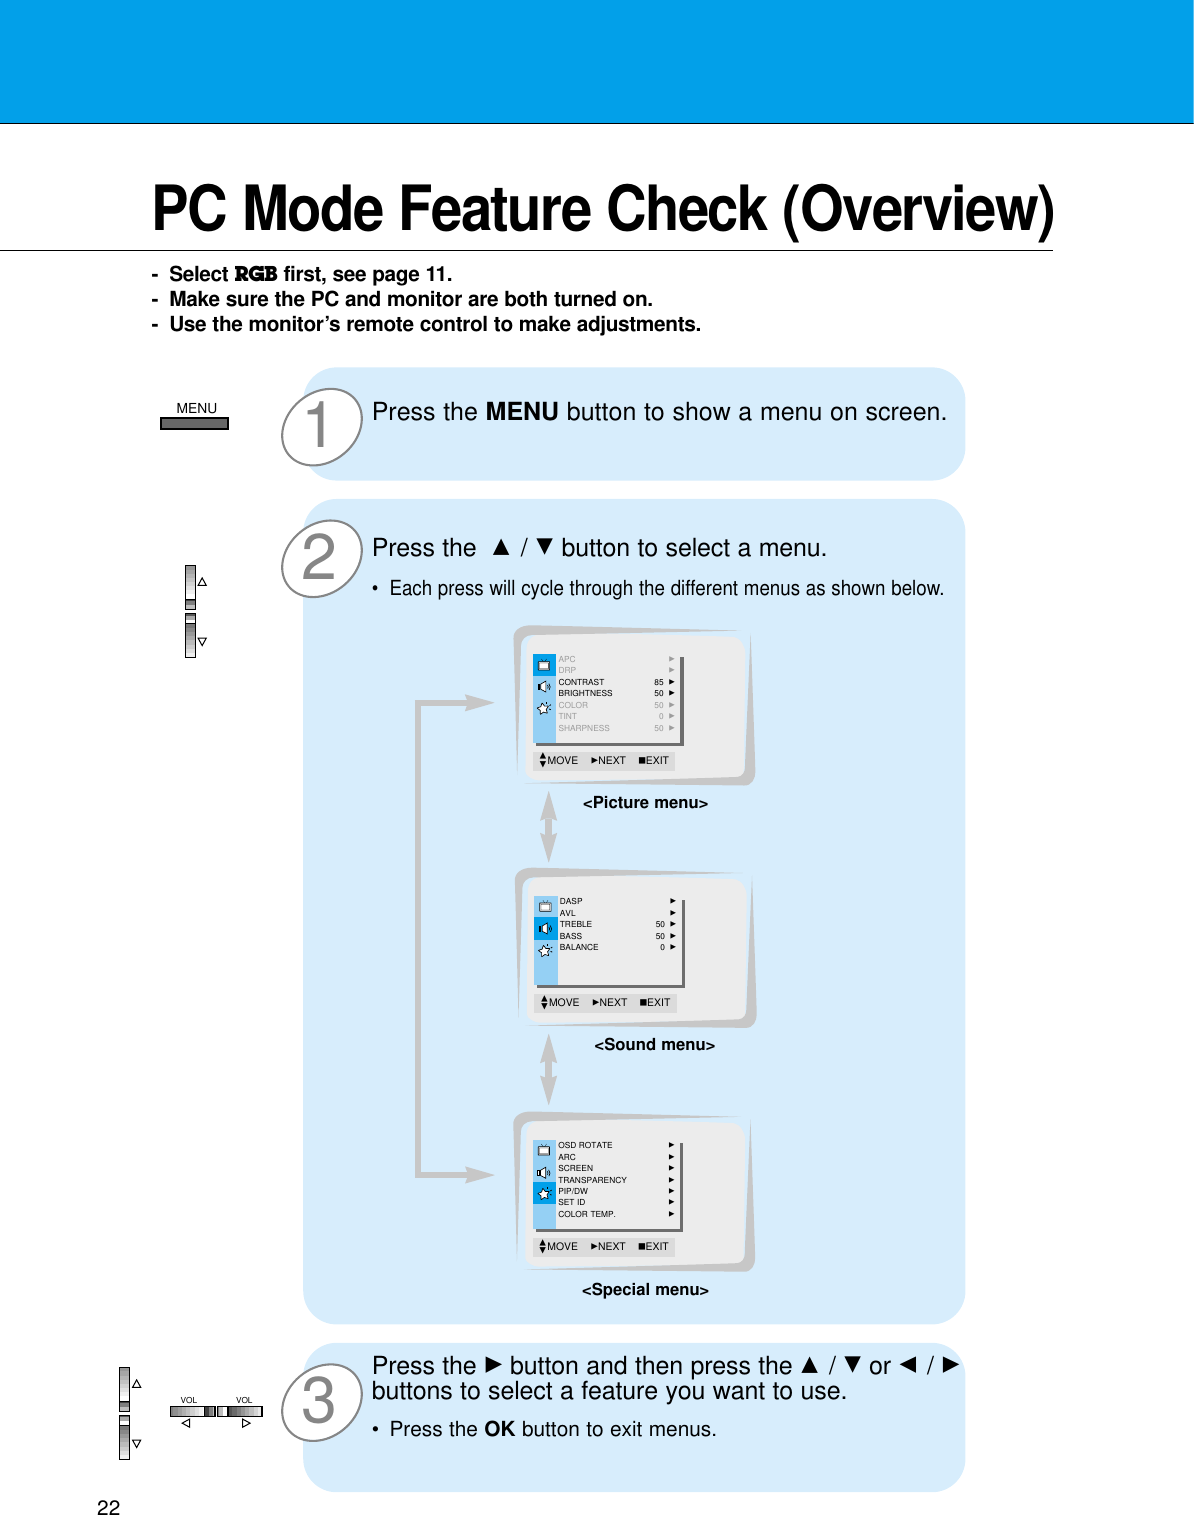 2232PC Mode Feature Check (Overview)- Select RGB first, see page 11.- Make sure the PC and monitor are both turned on.- Use the monitor’s remote control to make adjustments.1Press the MENU button to show a menu on screen.Press the Gbutton and then press the D / Eor F / Gbuttons to select a feature you want to use.•Press the OK button to exit menus.Press the  D / Ebutton to select a menu.•Each press will cycle through the different menus as shown below.APC GDRP GCONTRAST 85  GBRIGHTNESS 50  GCOLOR 50  GTINT 0  GSHARPNESS 50  GMOVE    GNEXT AEXITDEDASP GAVL GTREBLE 50  GBASS 50  GBALANCE 0  GMOVE    GNEXT AEXITDEOSD ROTATE GARC GSCREEN GTRANSPARENCY GPIP/DW GSET ID GCOLOR TEMP. GMOVE    GNEXT AEXITDE&lt;Picture menu&gt;&lt;Sound menu&gt;&lt;Special menu&gt;MENUVOL VOL